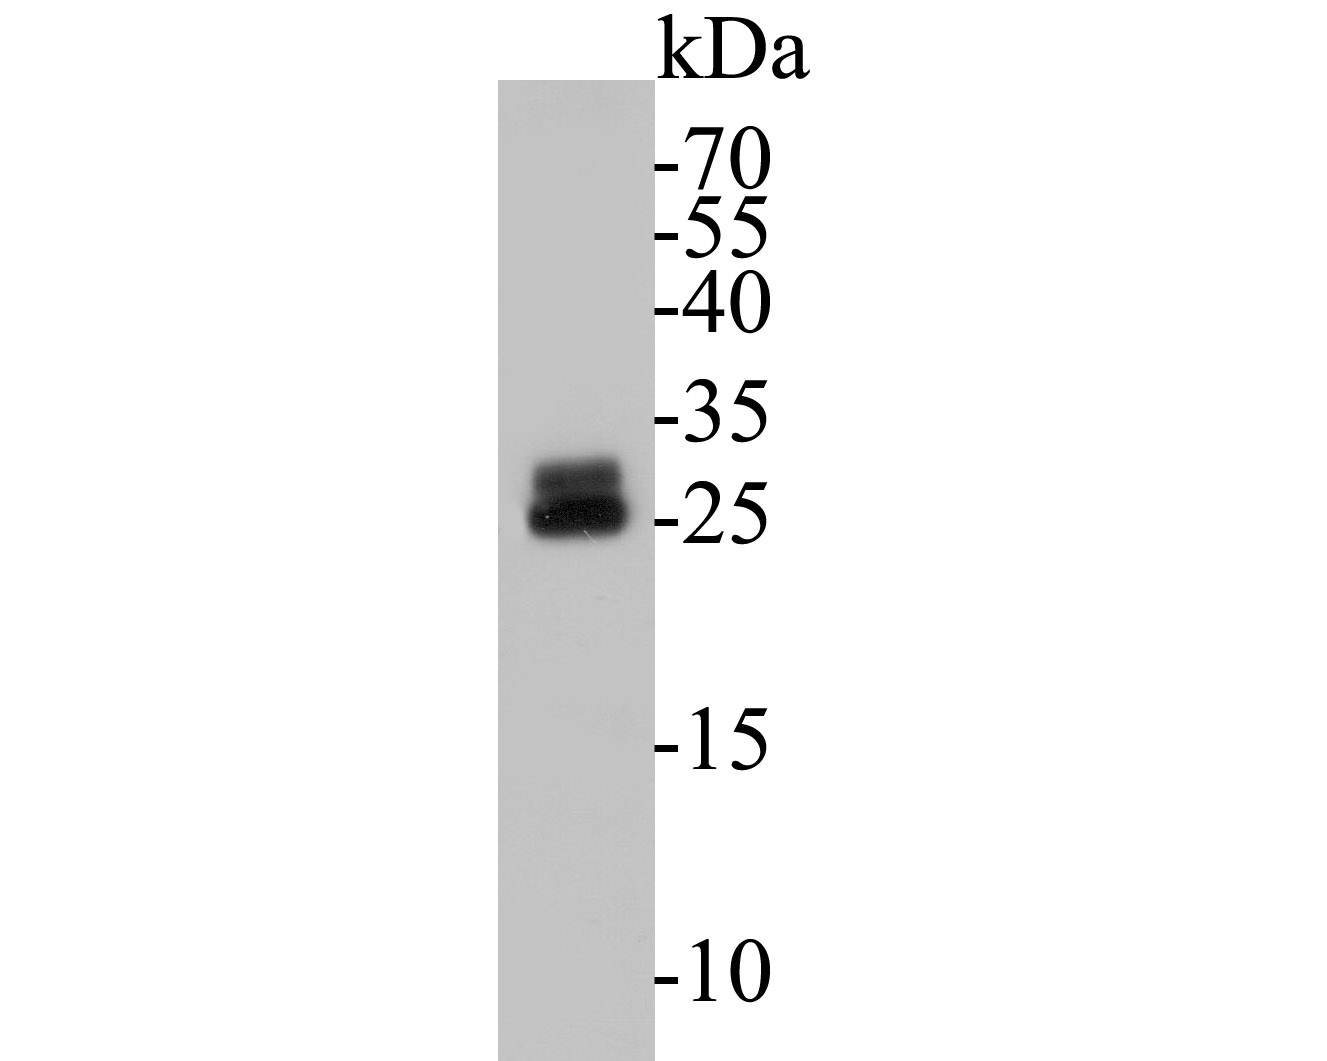 Western blot analysis of RBPMS on mouse lung tissue lysates. Proteins were transferred to a PVDF membrane and blocked with 5% BSA in PBS for 1 hour at room temperature. The primary antibody (ER1901-43, 1/500) was used in 5% BSA at room temperature for 2 hours. Goat Anti-Rabbit IgG - HRP Secondary Antibody (HA1001) at 1:5,000 dilution was used for 1 hour at room temperature.